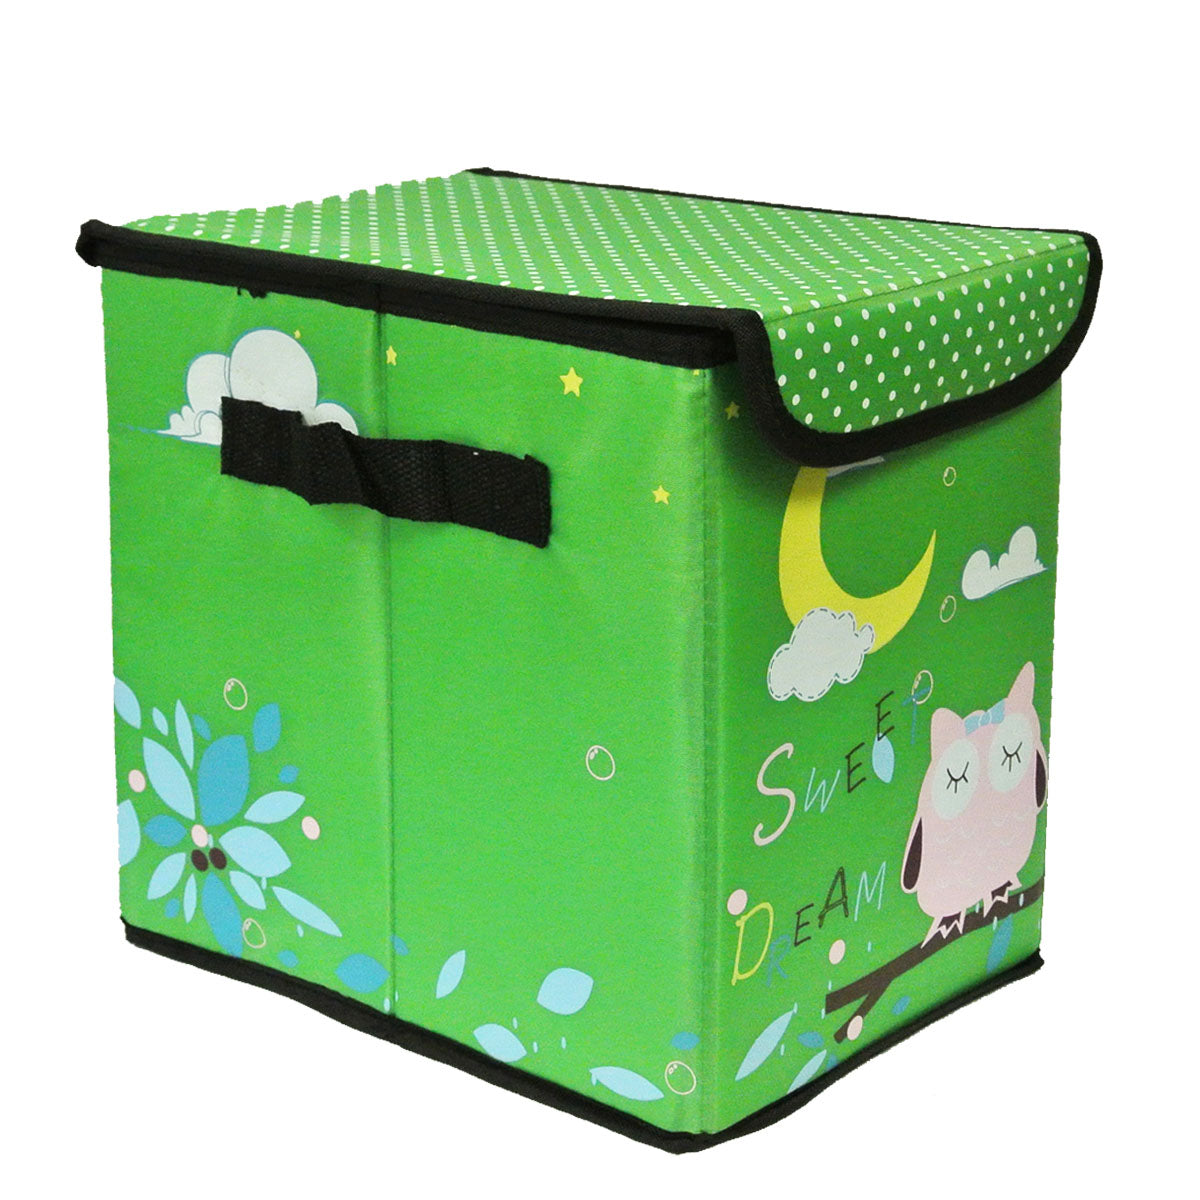 Wrapables Children's Owl Fabric Storage Bin for Clothes and Toys Yellow